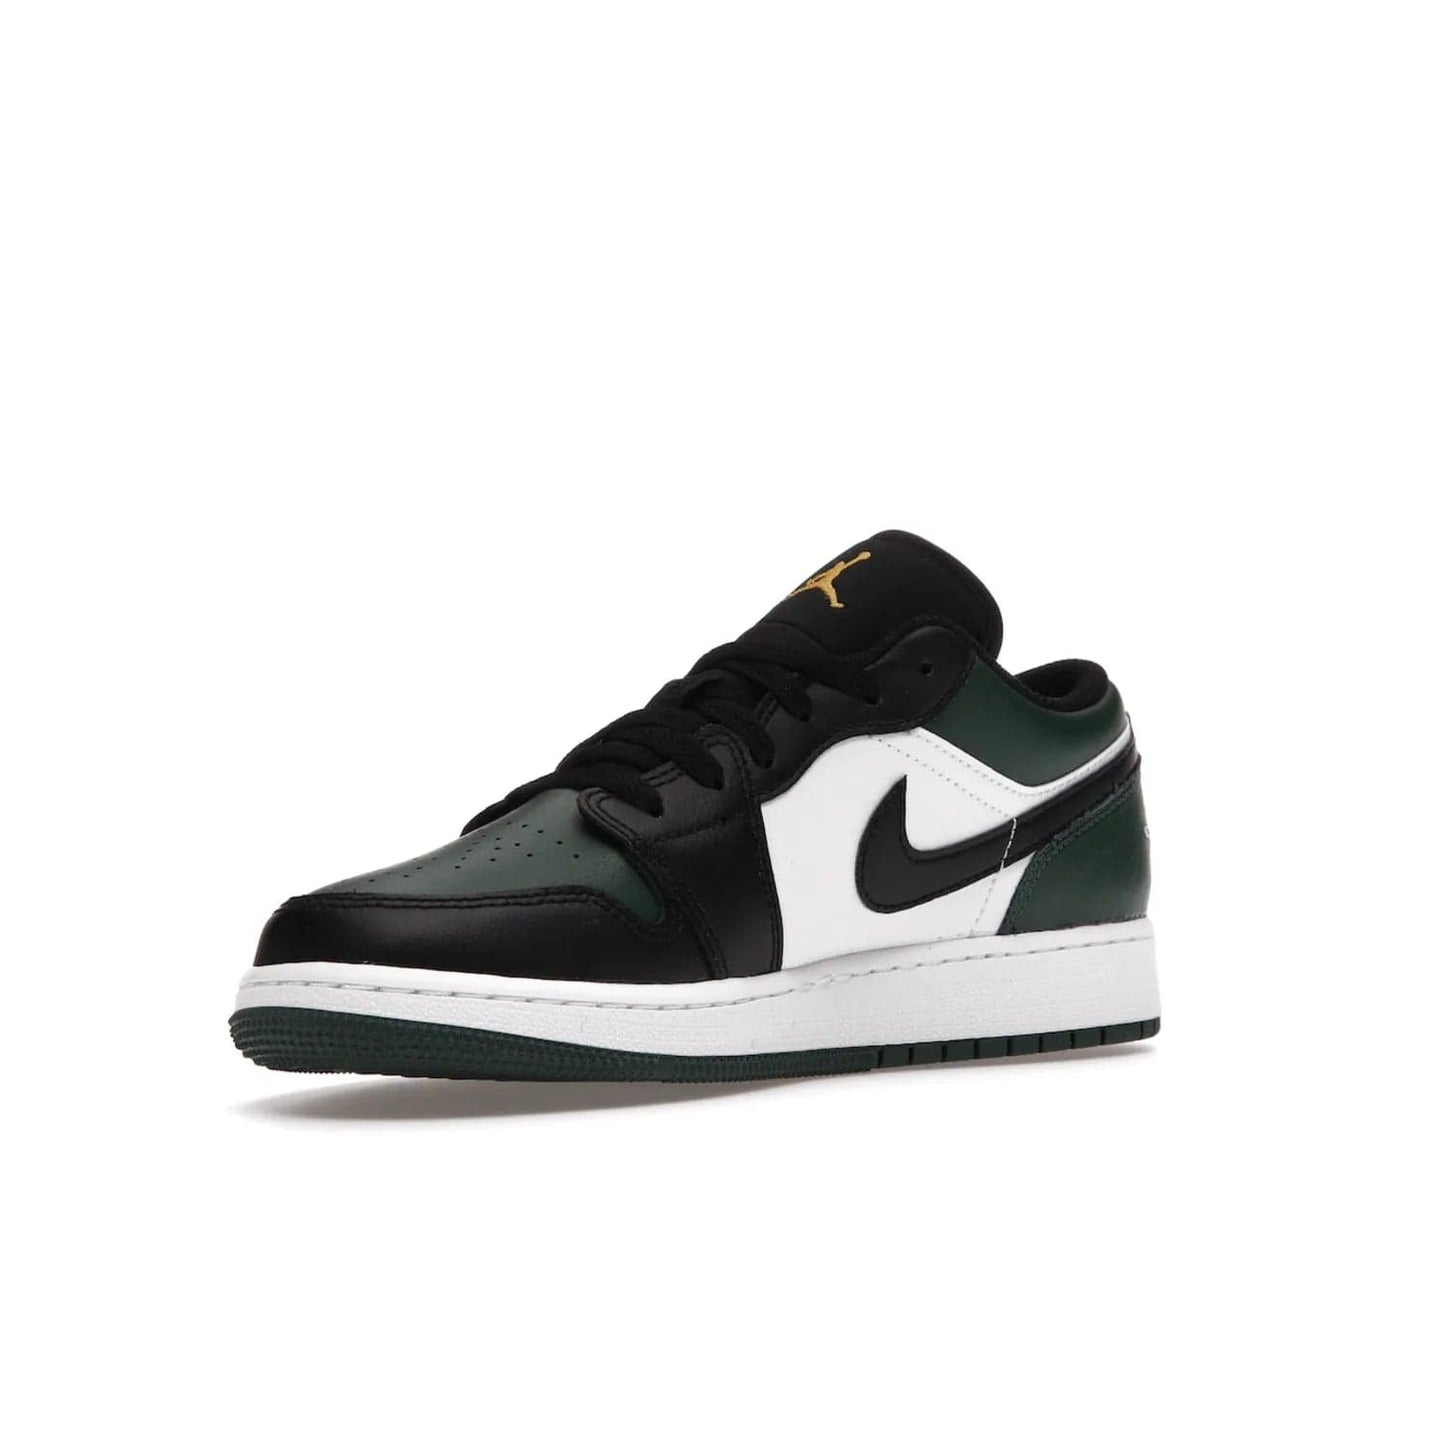 Jordan 1 Low Green Toe (GS) - Image 15 - Only at www.BallersClubKickz.com - Get the perfect low cut Jordans. Shop the Air Jordan 1 Low Noble Green GS shoes with its unique colorway and stencil Jumpman logo. Available October 2021.